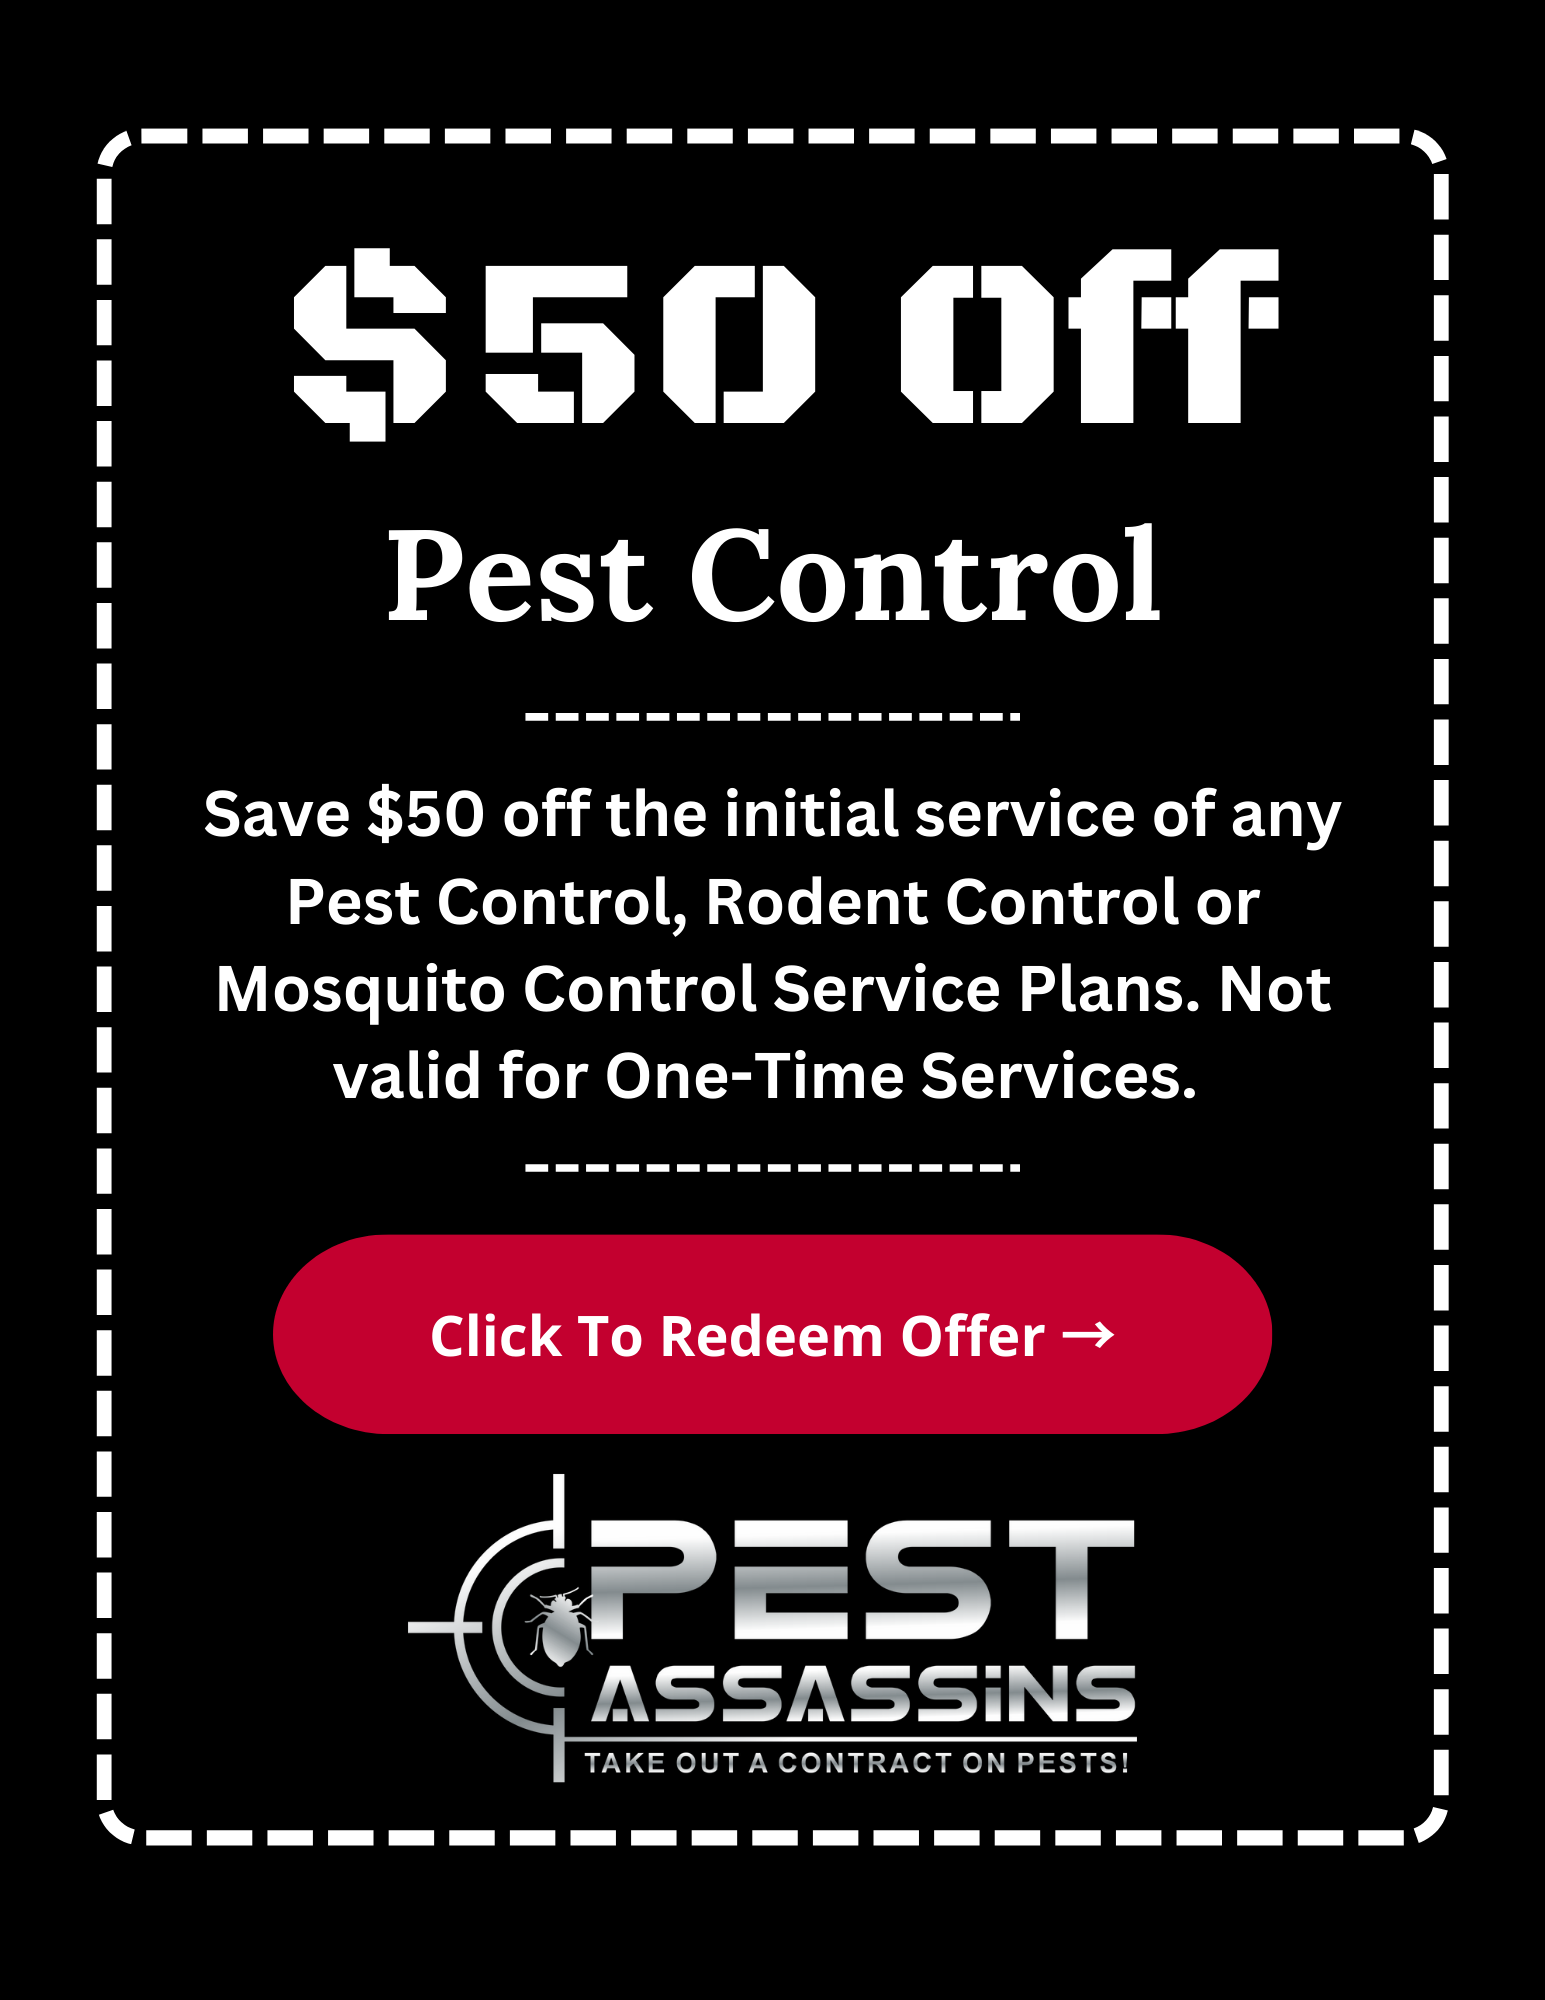 Pest control discount coupon offer 